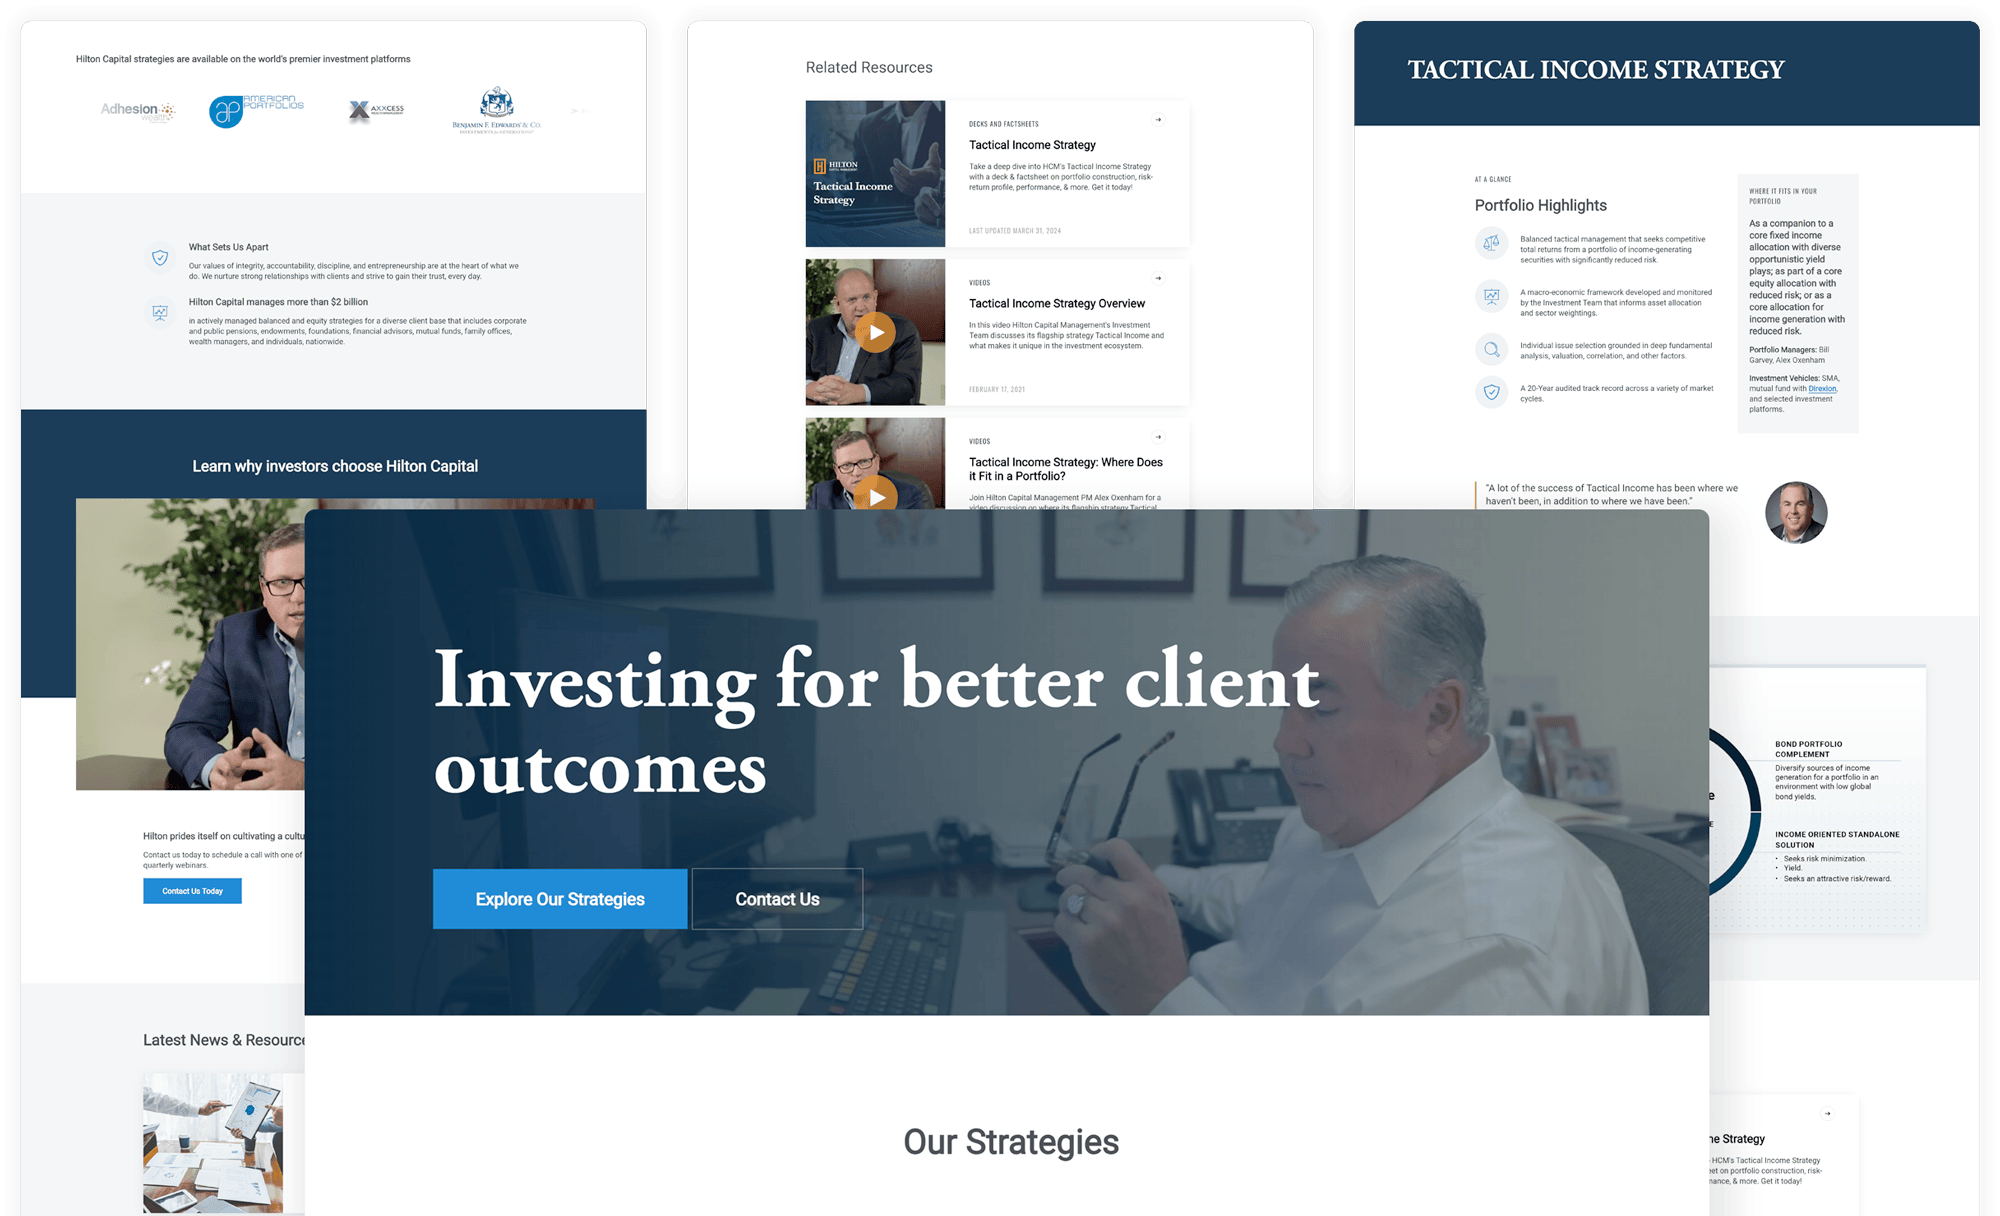 various screenshots of images from Hilton Capital Management website